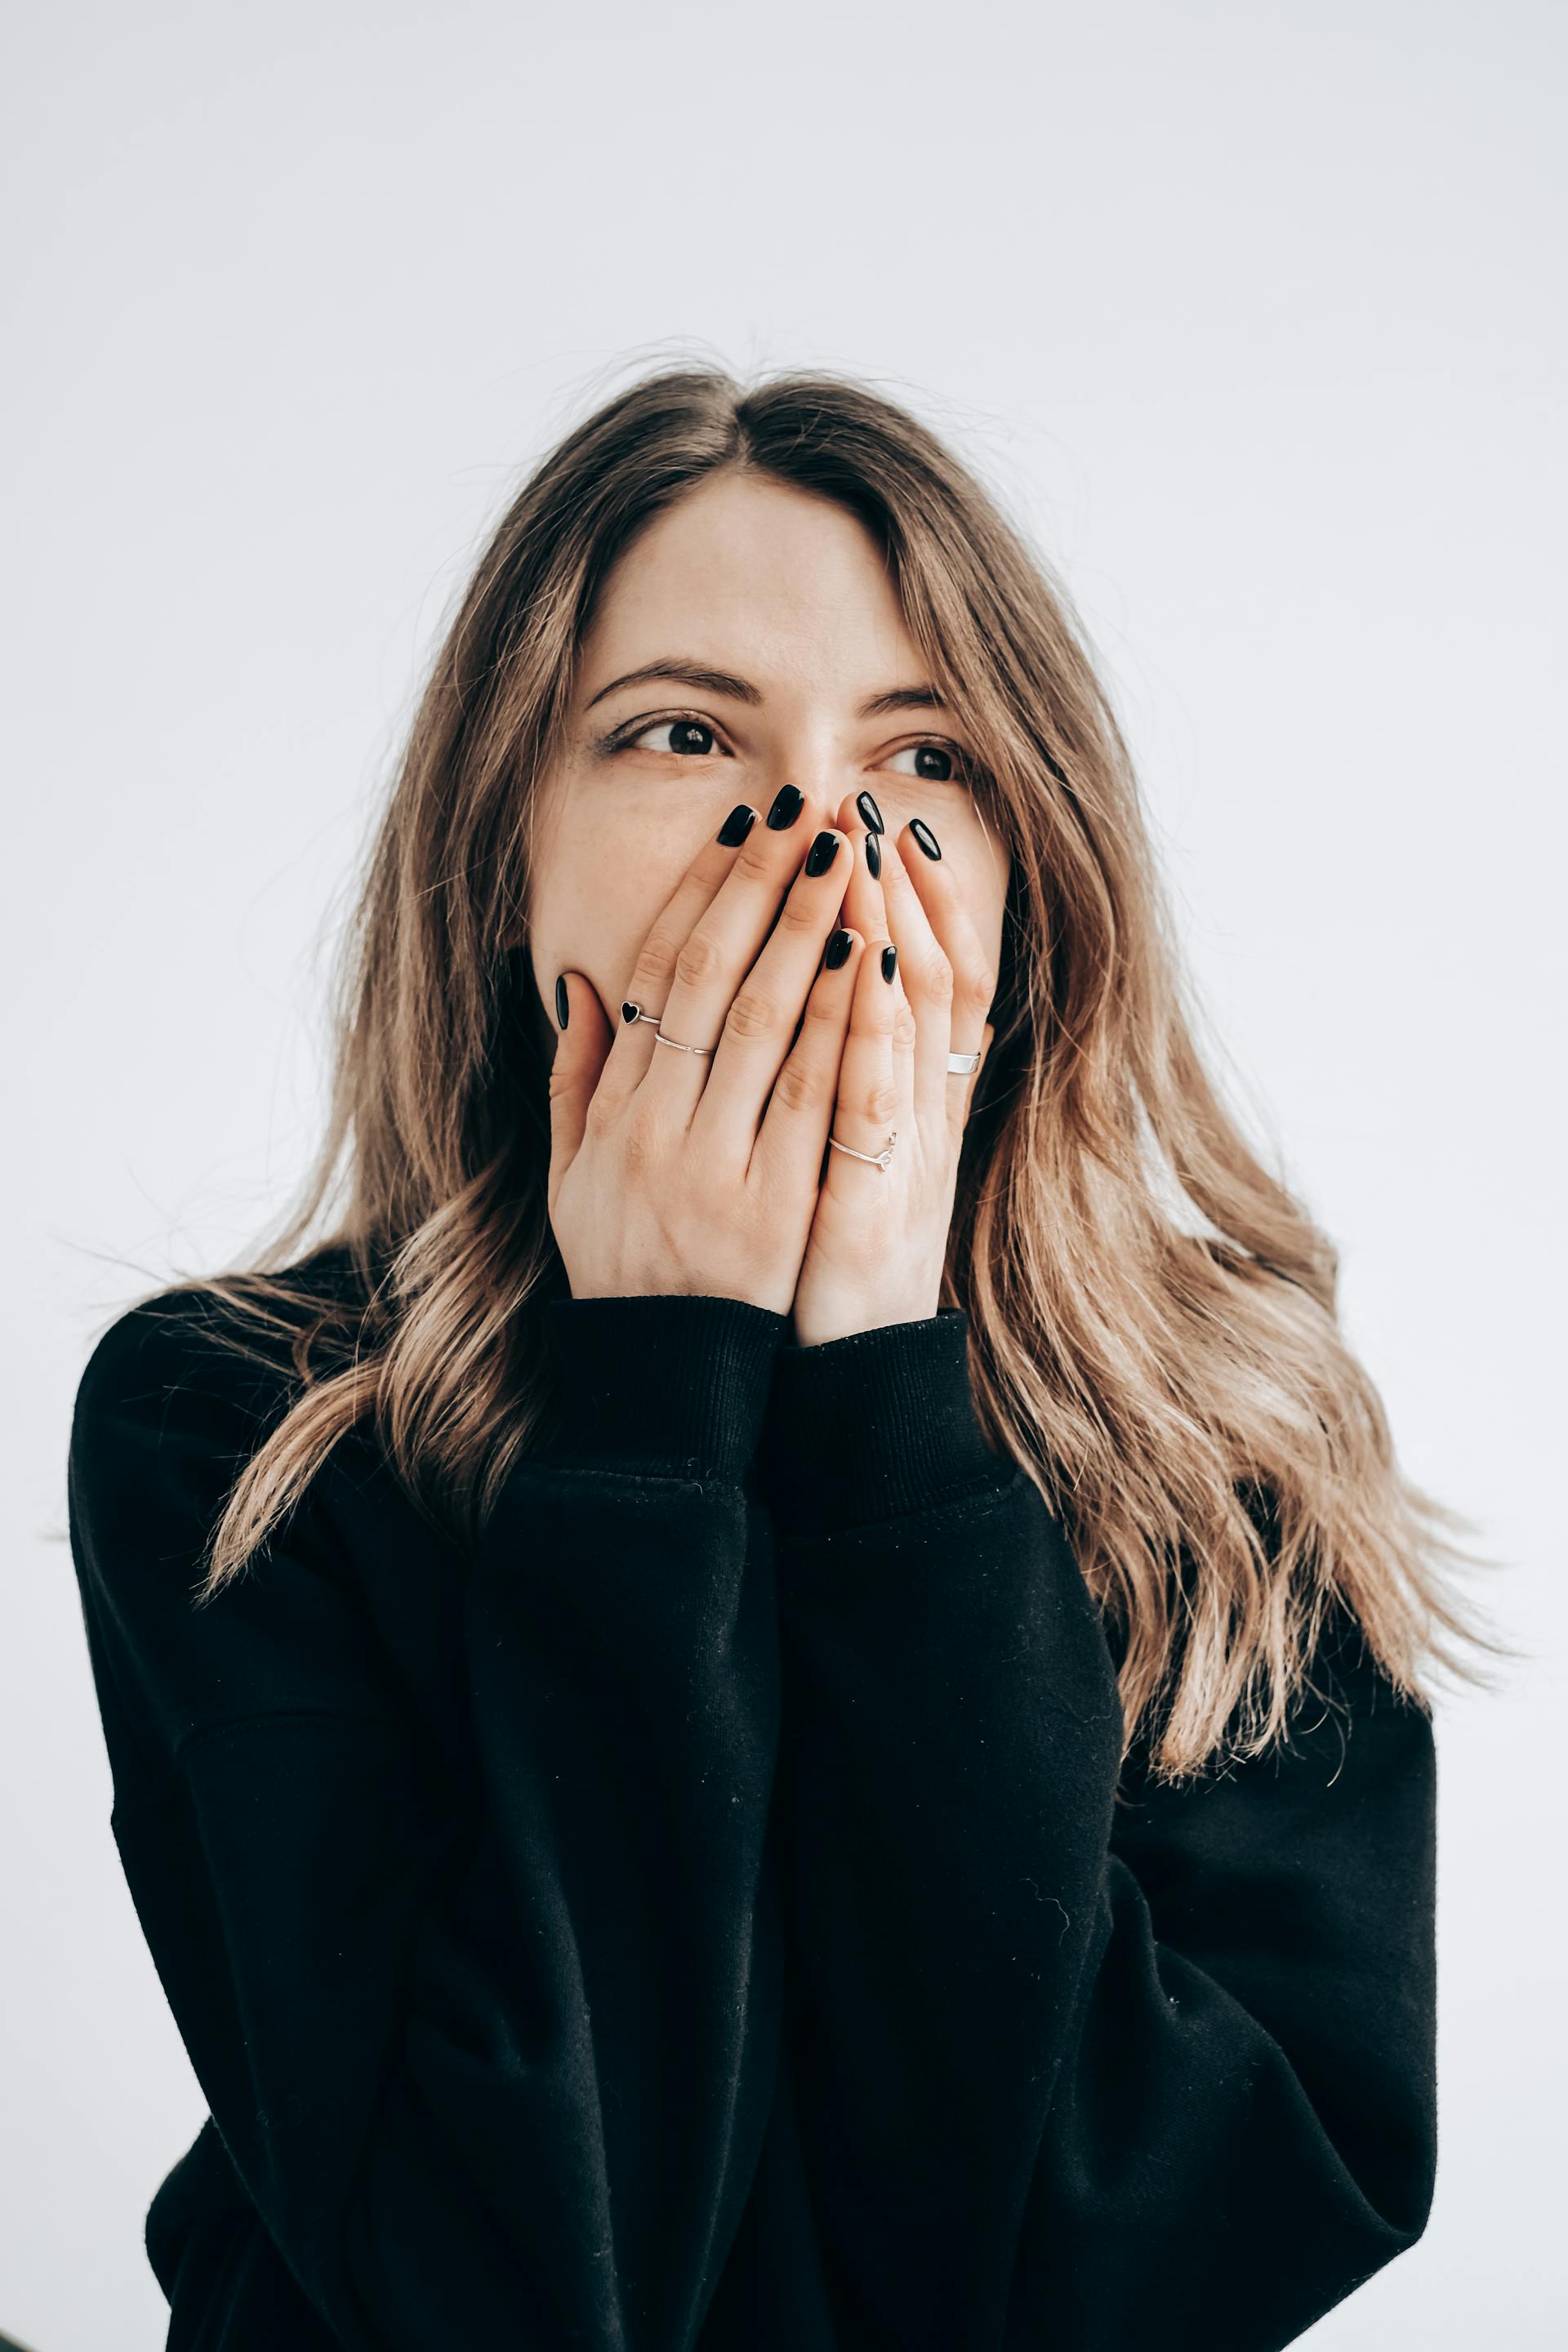 Shocked woman covering her mouth | Source: Pexels